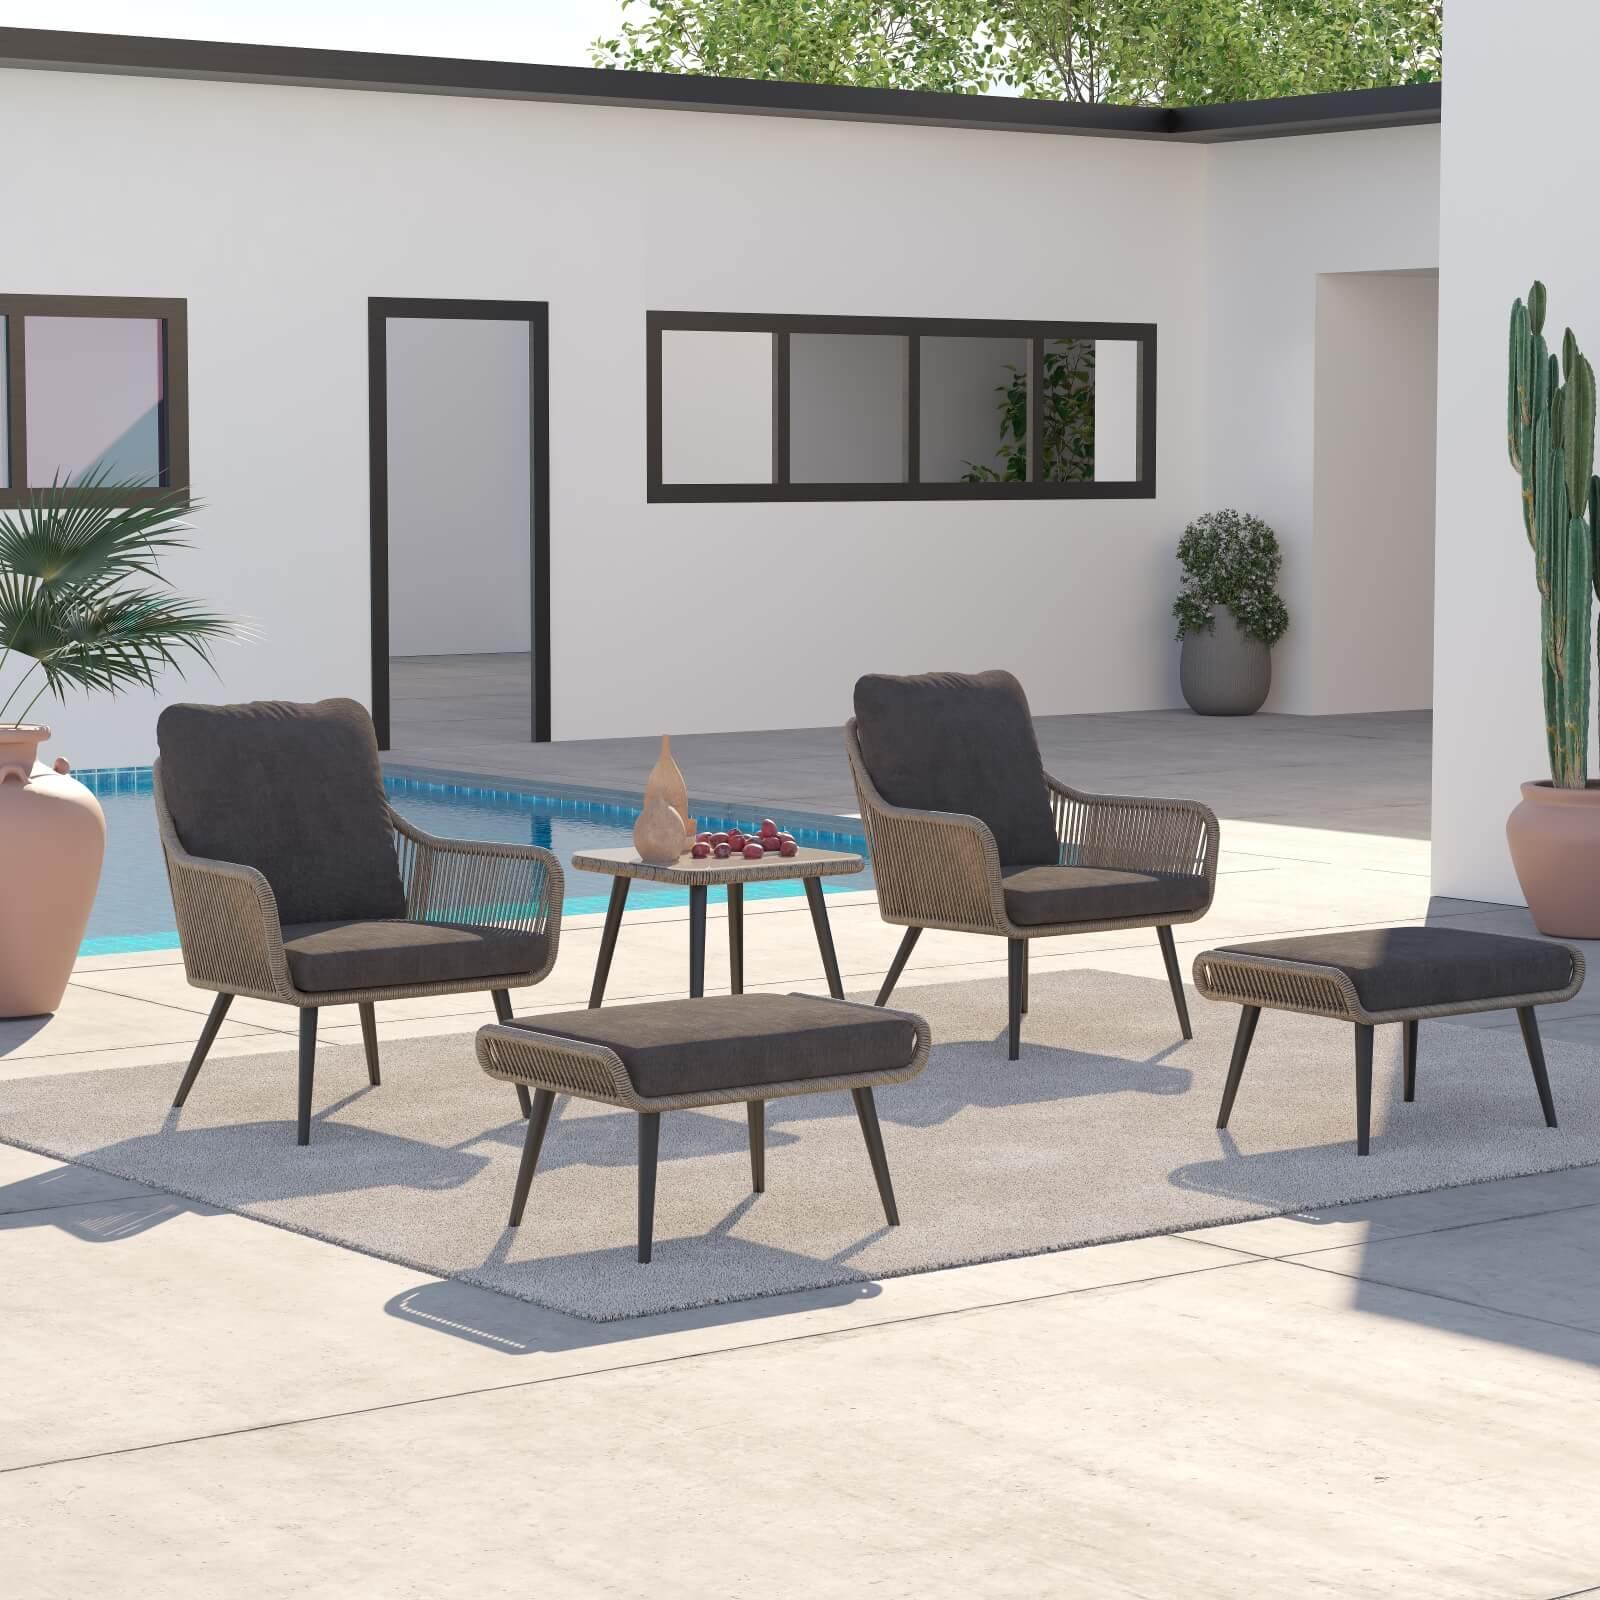 Hallerbos 5-piece outdoor bistro set with ottomans, steel frame and grey twisted rattan design, dark grey cushion, 1 square coffee table, 2 armchairs, 2 ottomans - Jardina Furniture#Color_Grey